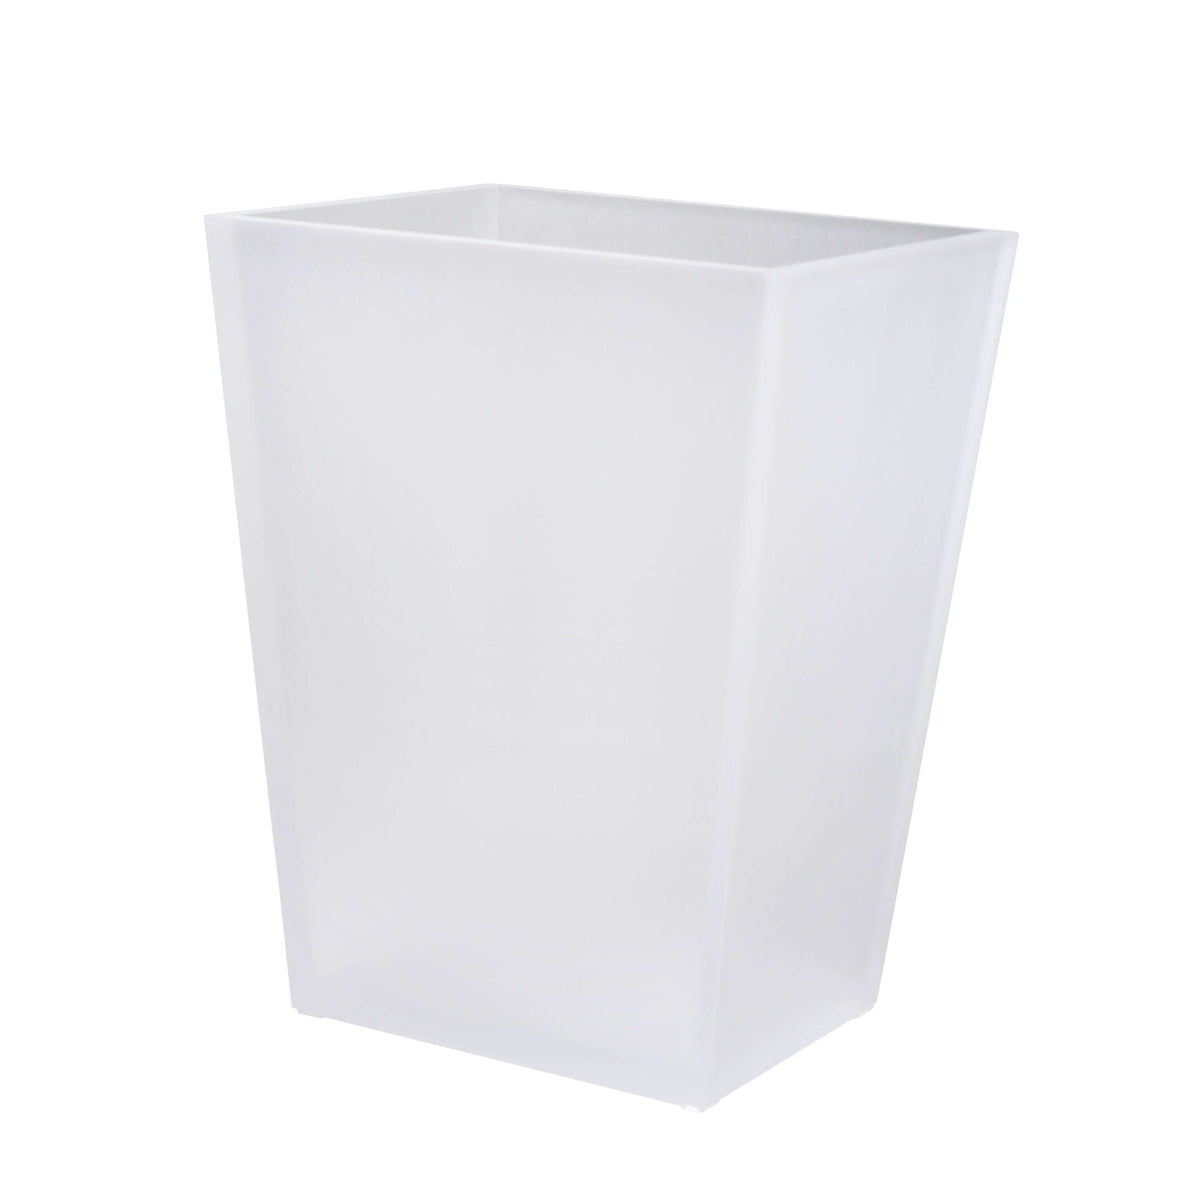 Mike + Ally - Ice Frosted Snow Wastebasket - 31162 - White - 